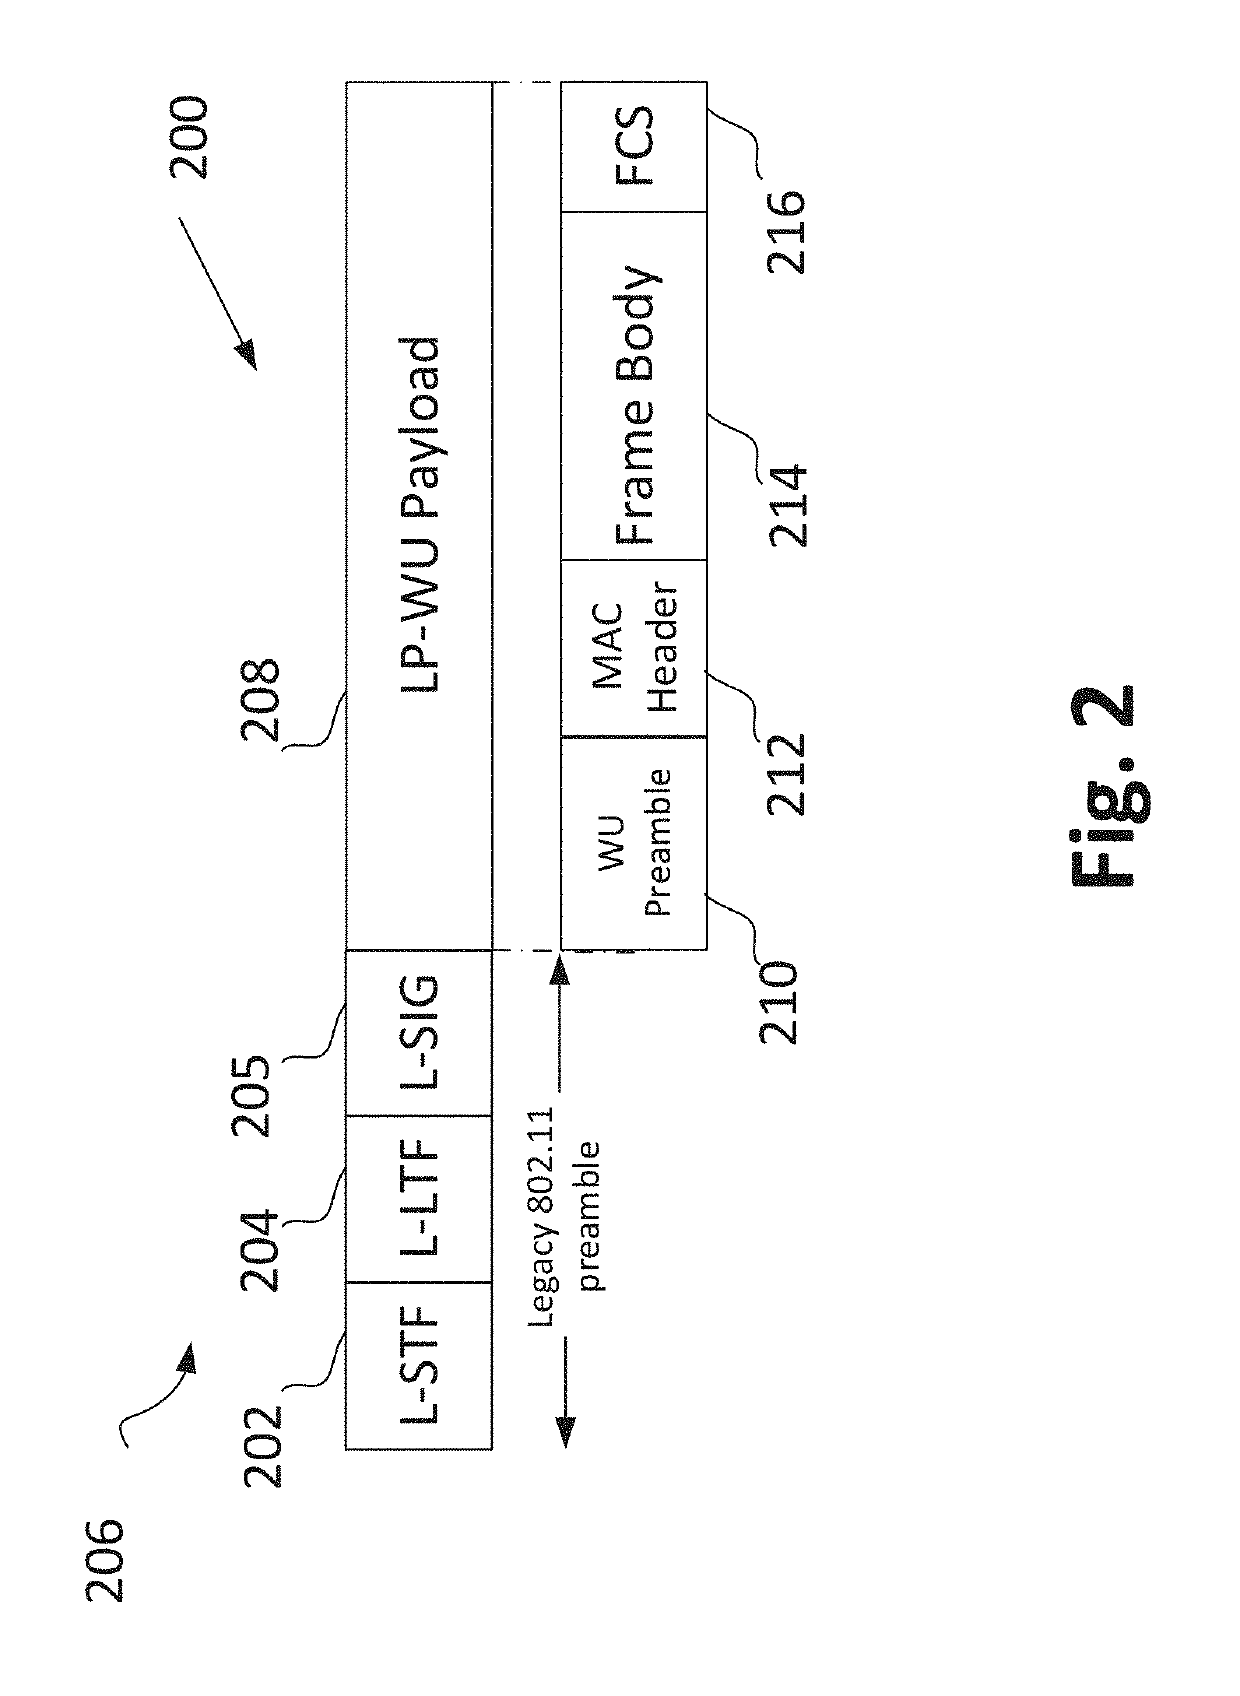 Wireless communication system and method to improve coexistence for wake-up packets